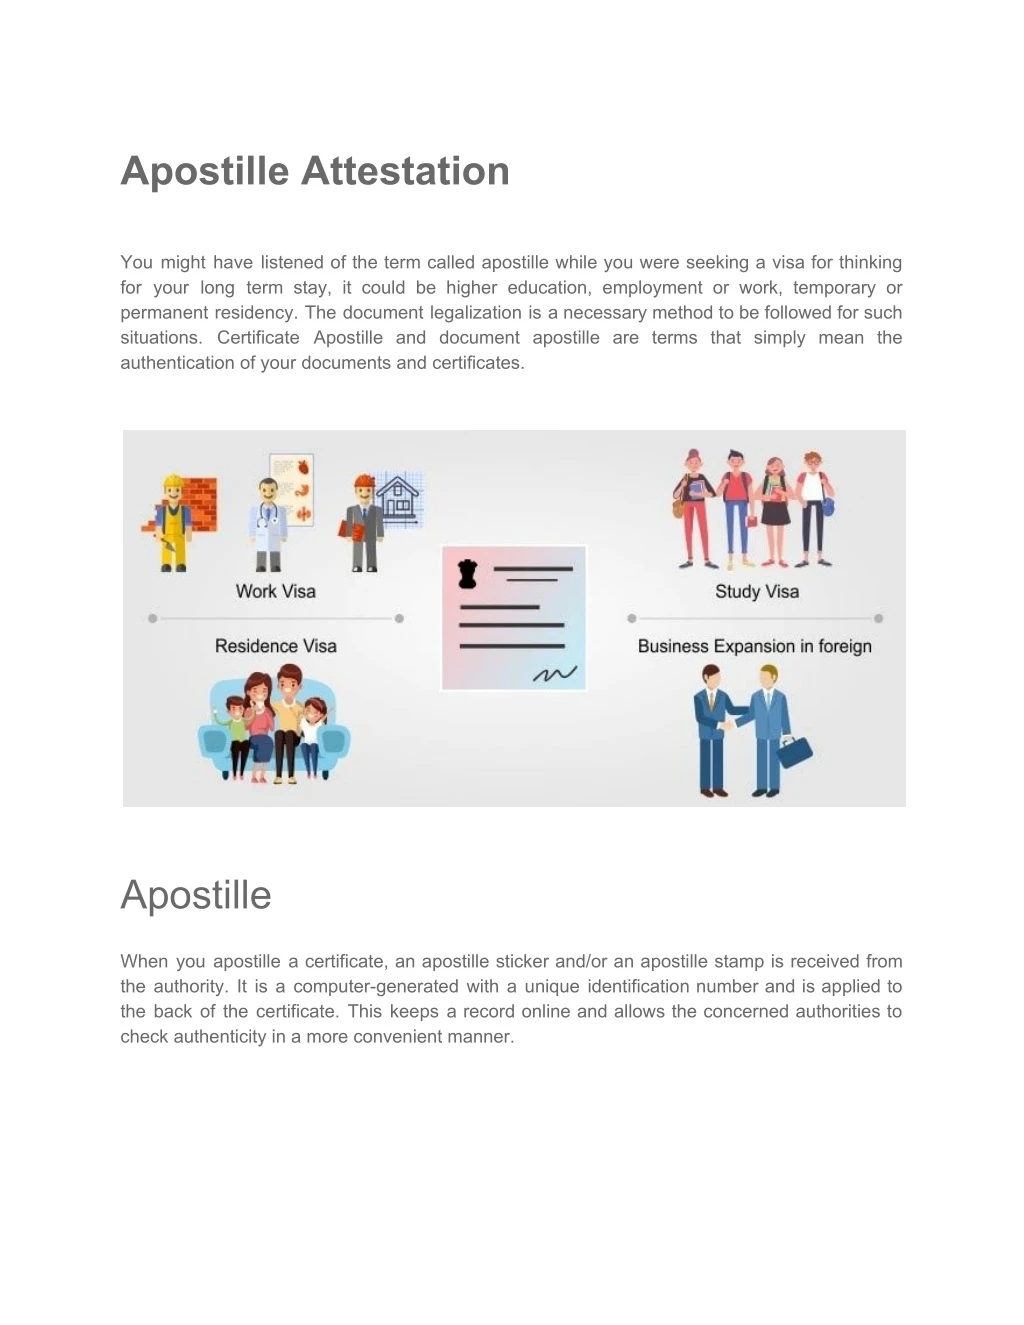 apostille attestation you might have listened